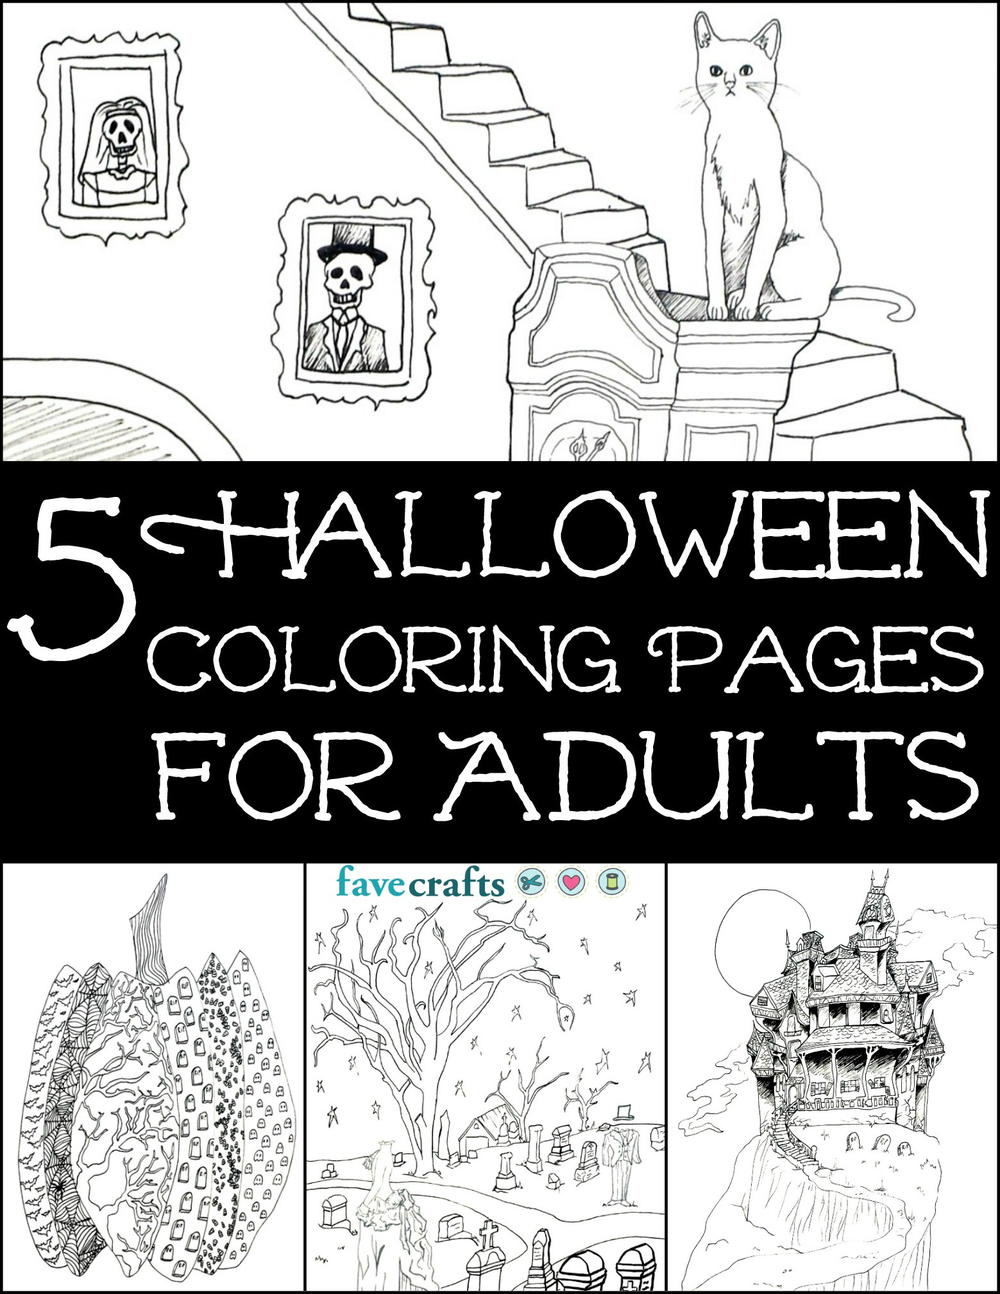 Download 5 Free Halloween Coloring Pages for Adults PDF | FaveCrafts.com